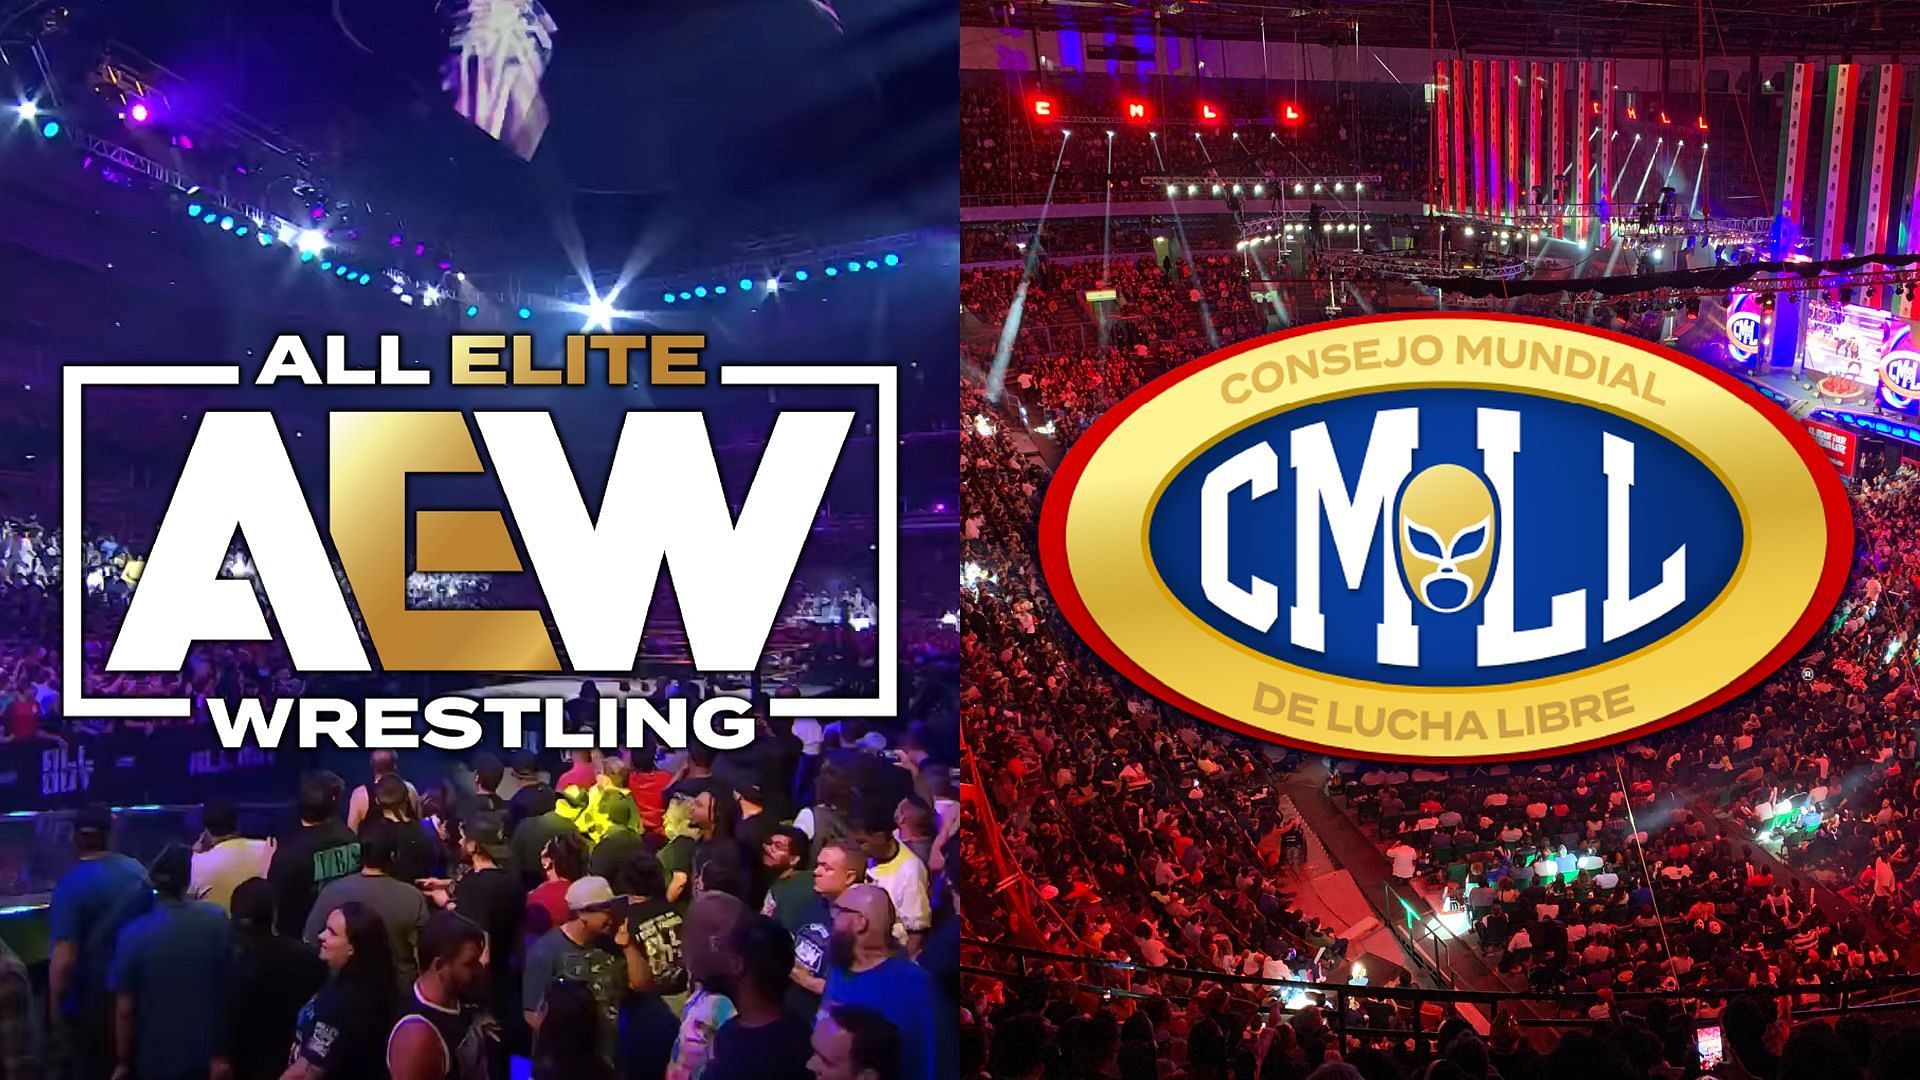 AEW and CMLL are enjoying the fruits of their partnership (image credits: All Elite Wrestling on YouTube; CMLL.com)